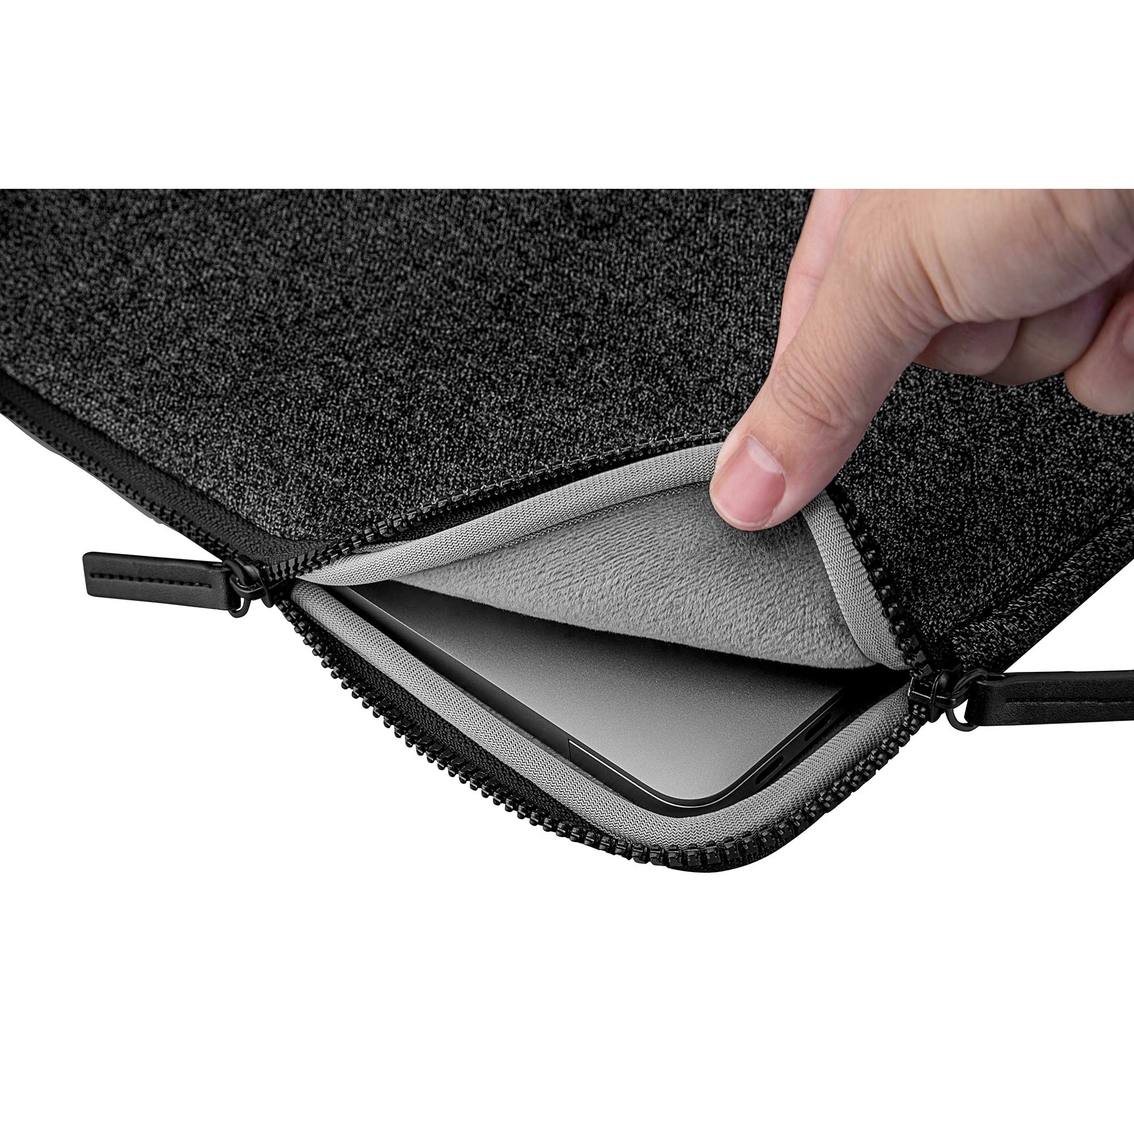 LAUT Design USA Inflight Protective Sleeve for MacBook 13 in. - Image 3 of 4